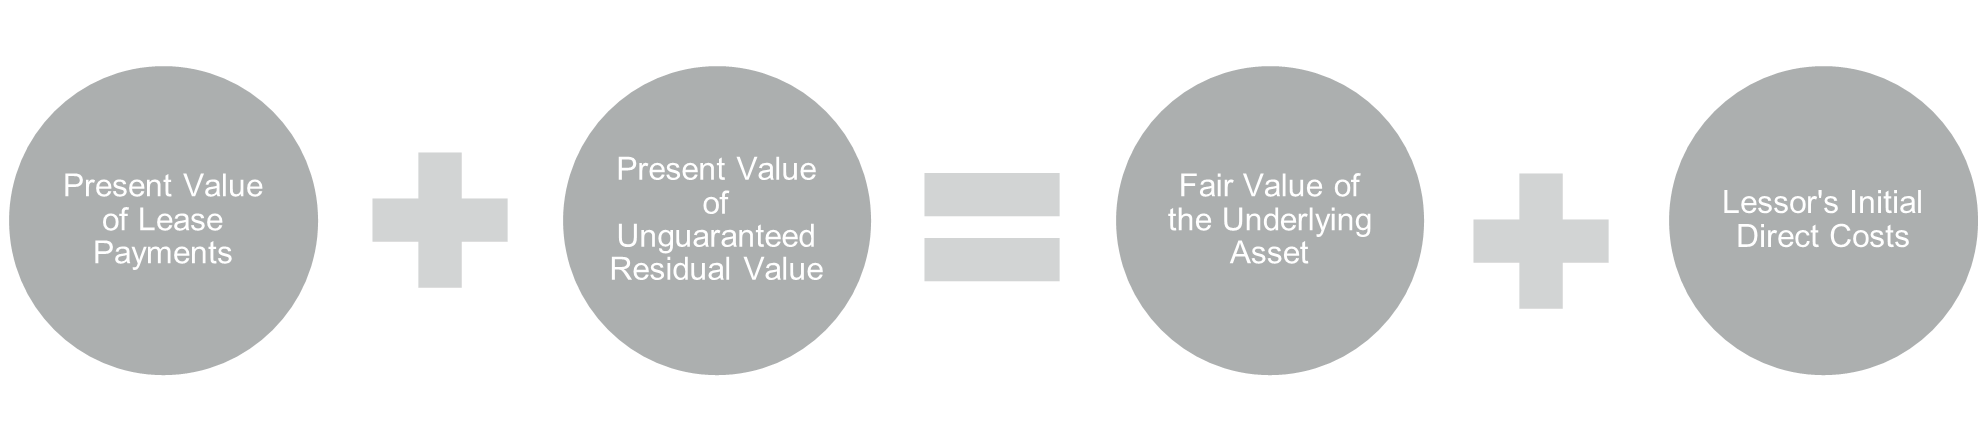 Present Value of Lease Payments + Present Value of Unguaranteed Residual Value = Fair Value of the Underlying Asset + Lessor's Initial Direct Costs